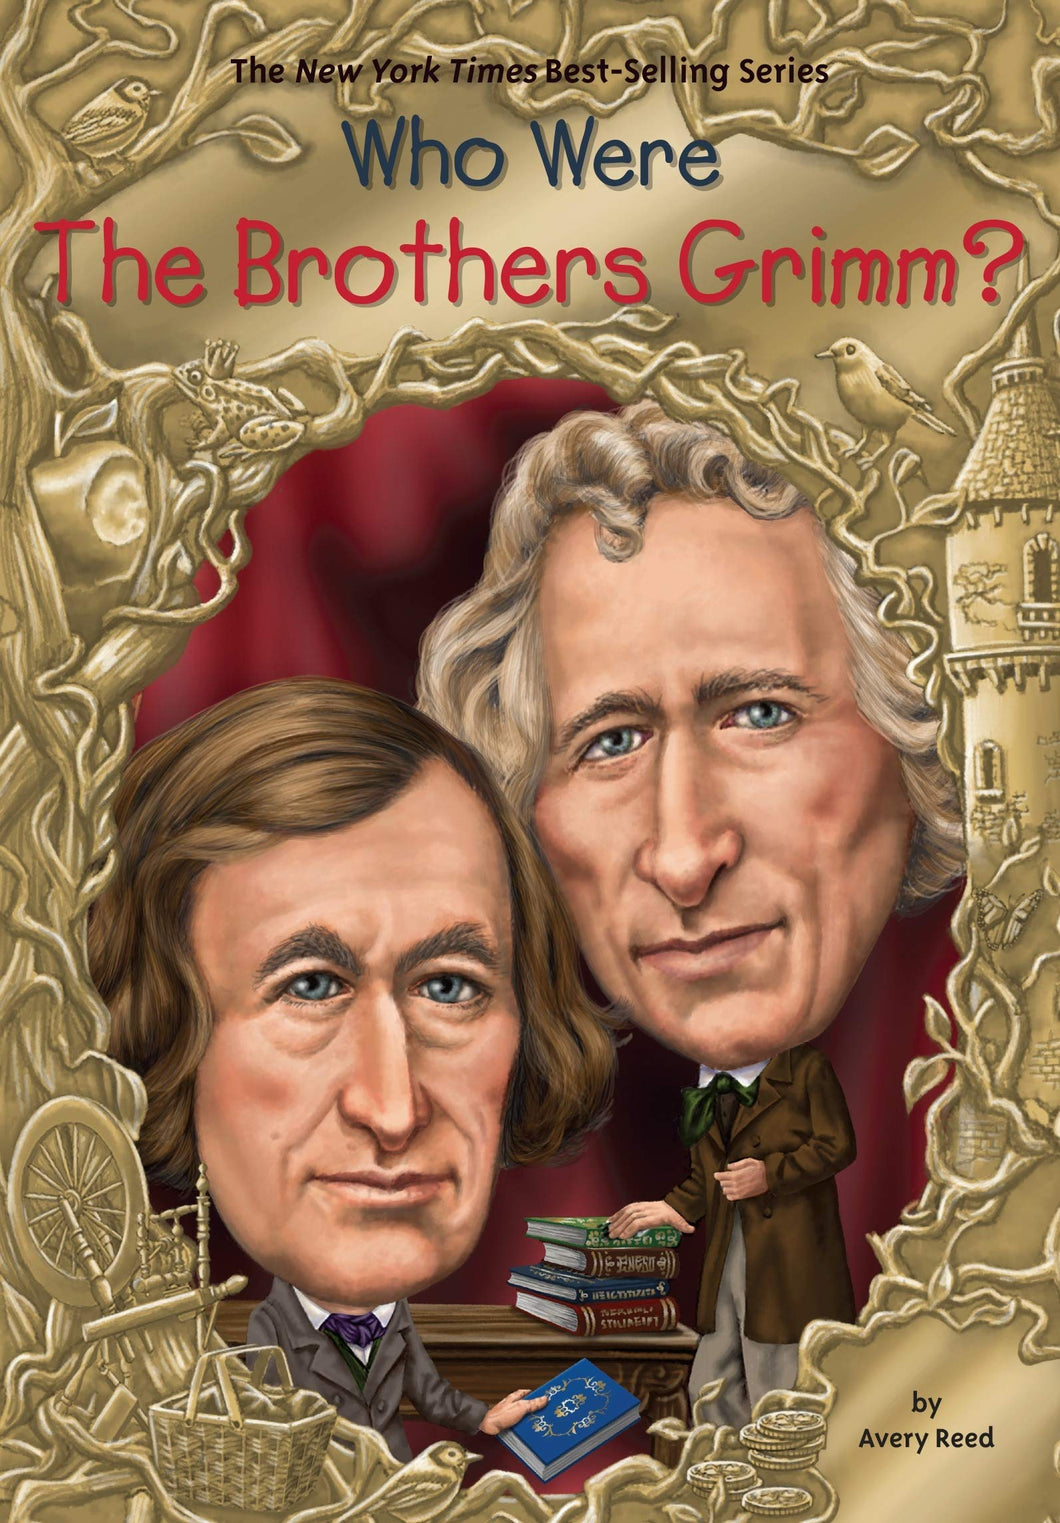 WHO WERE THE BROTHERS GRIMM